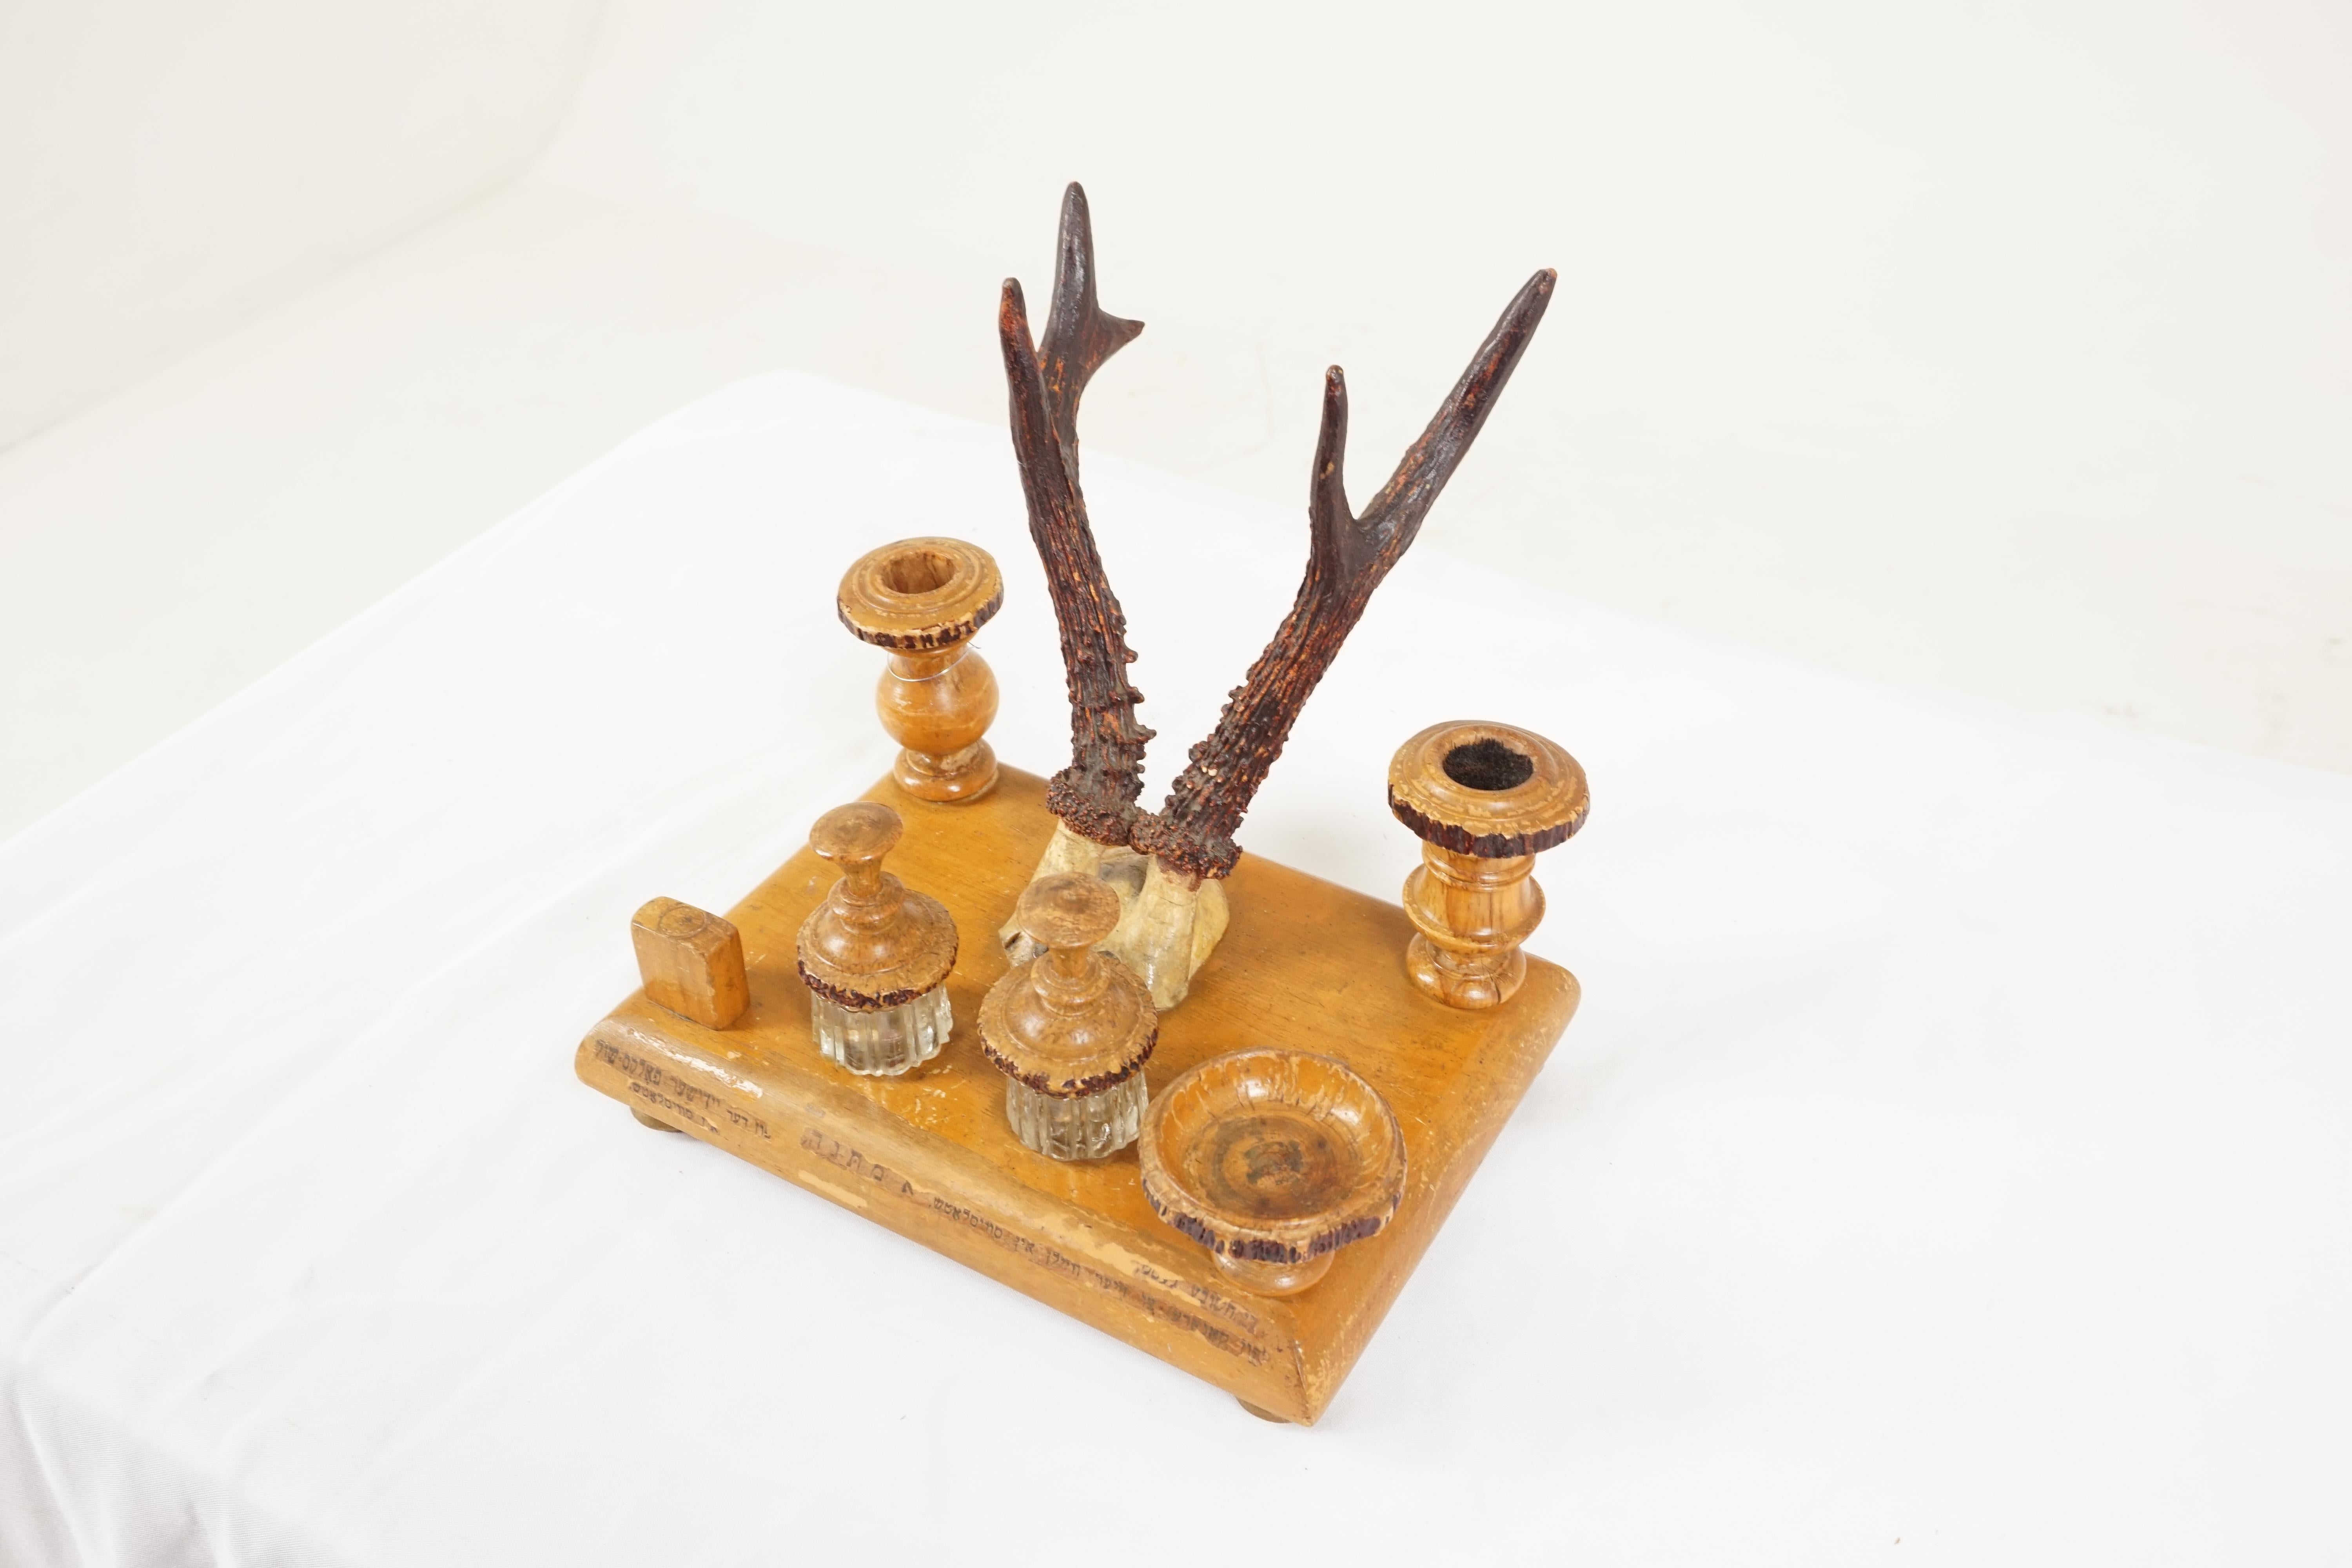 Antique double inkstand, carved wood and antlers, Middle Eastern 1930, H564

Middle Eastern
Wood + horn
Wooden base with bun feet
Having two glass inkwells with wooden tops
Two antler pen holders
Stamp holder, candlestick and a brush